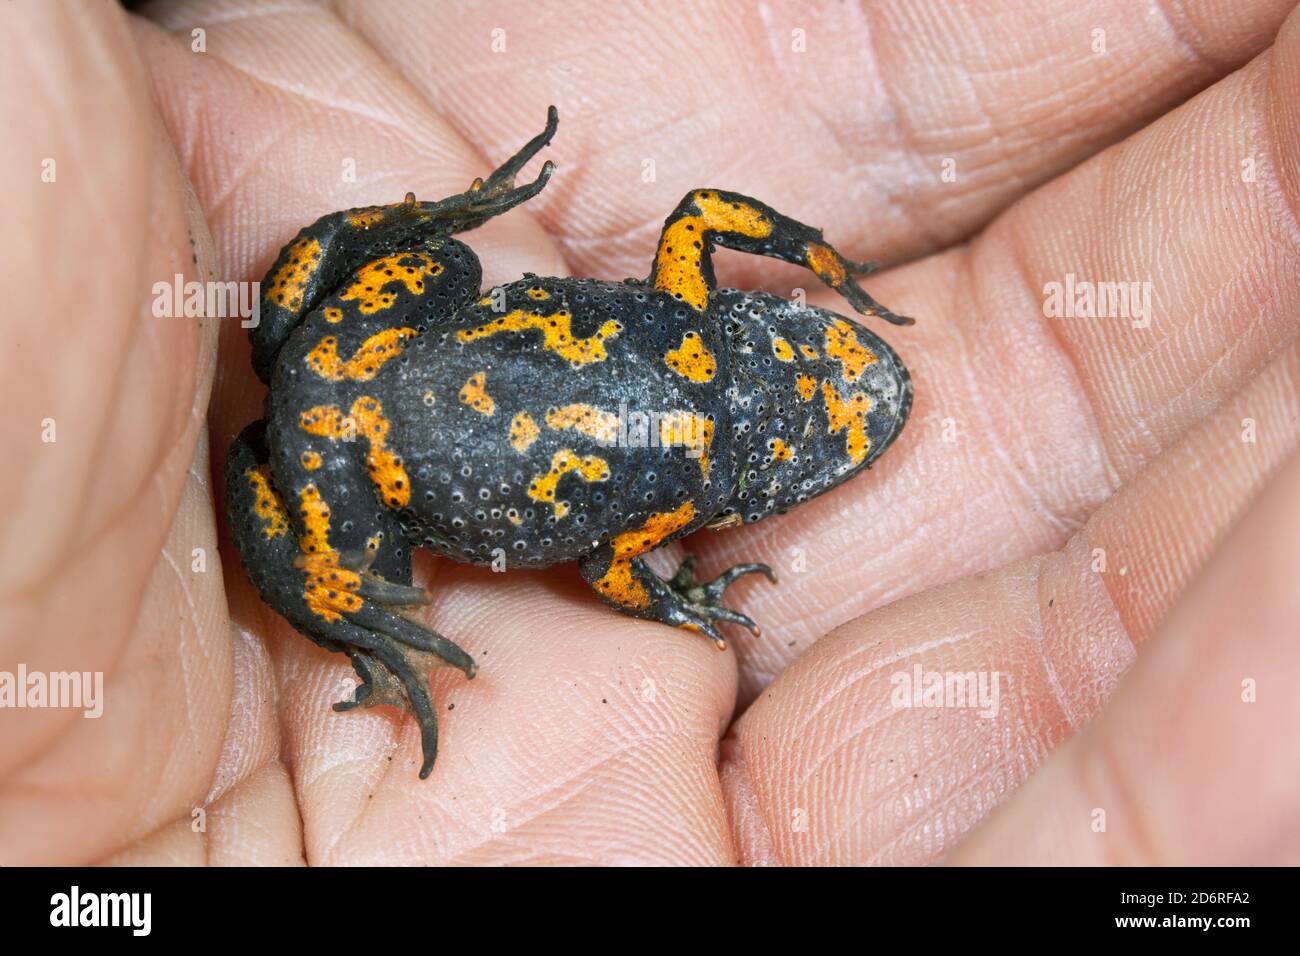 fire-bellied toad (Bombina bombina), lying on its back in a hand, ventral side, Germany Stock Photo